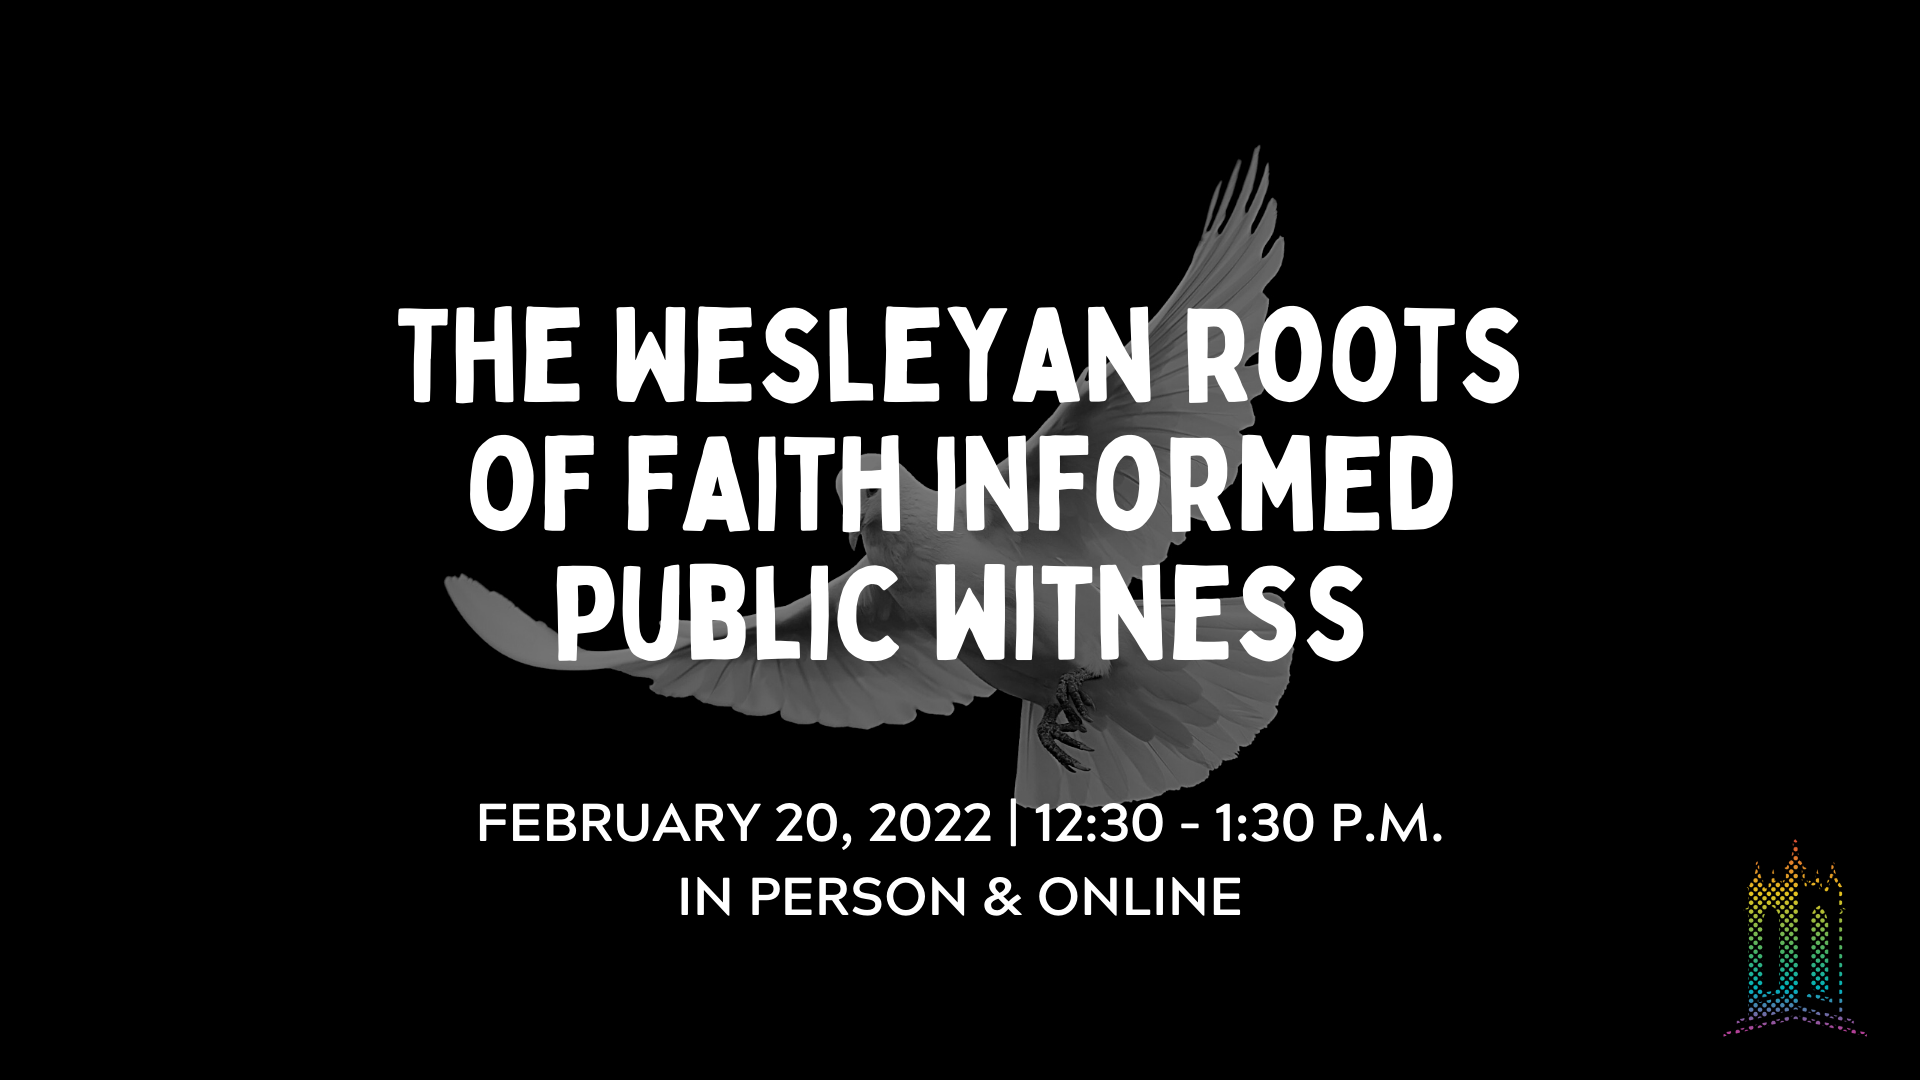 The Wesleyan Roots of Faith Informed Public Witness